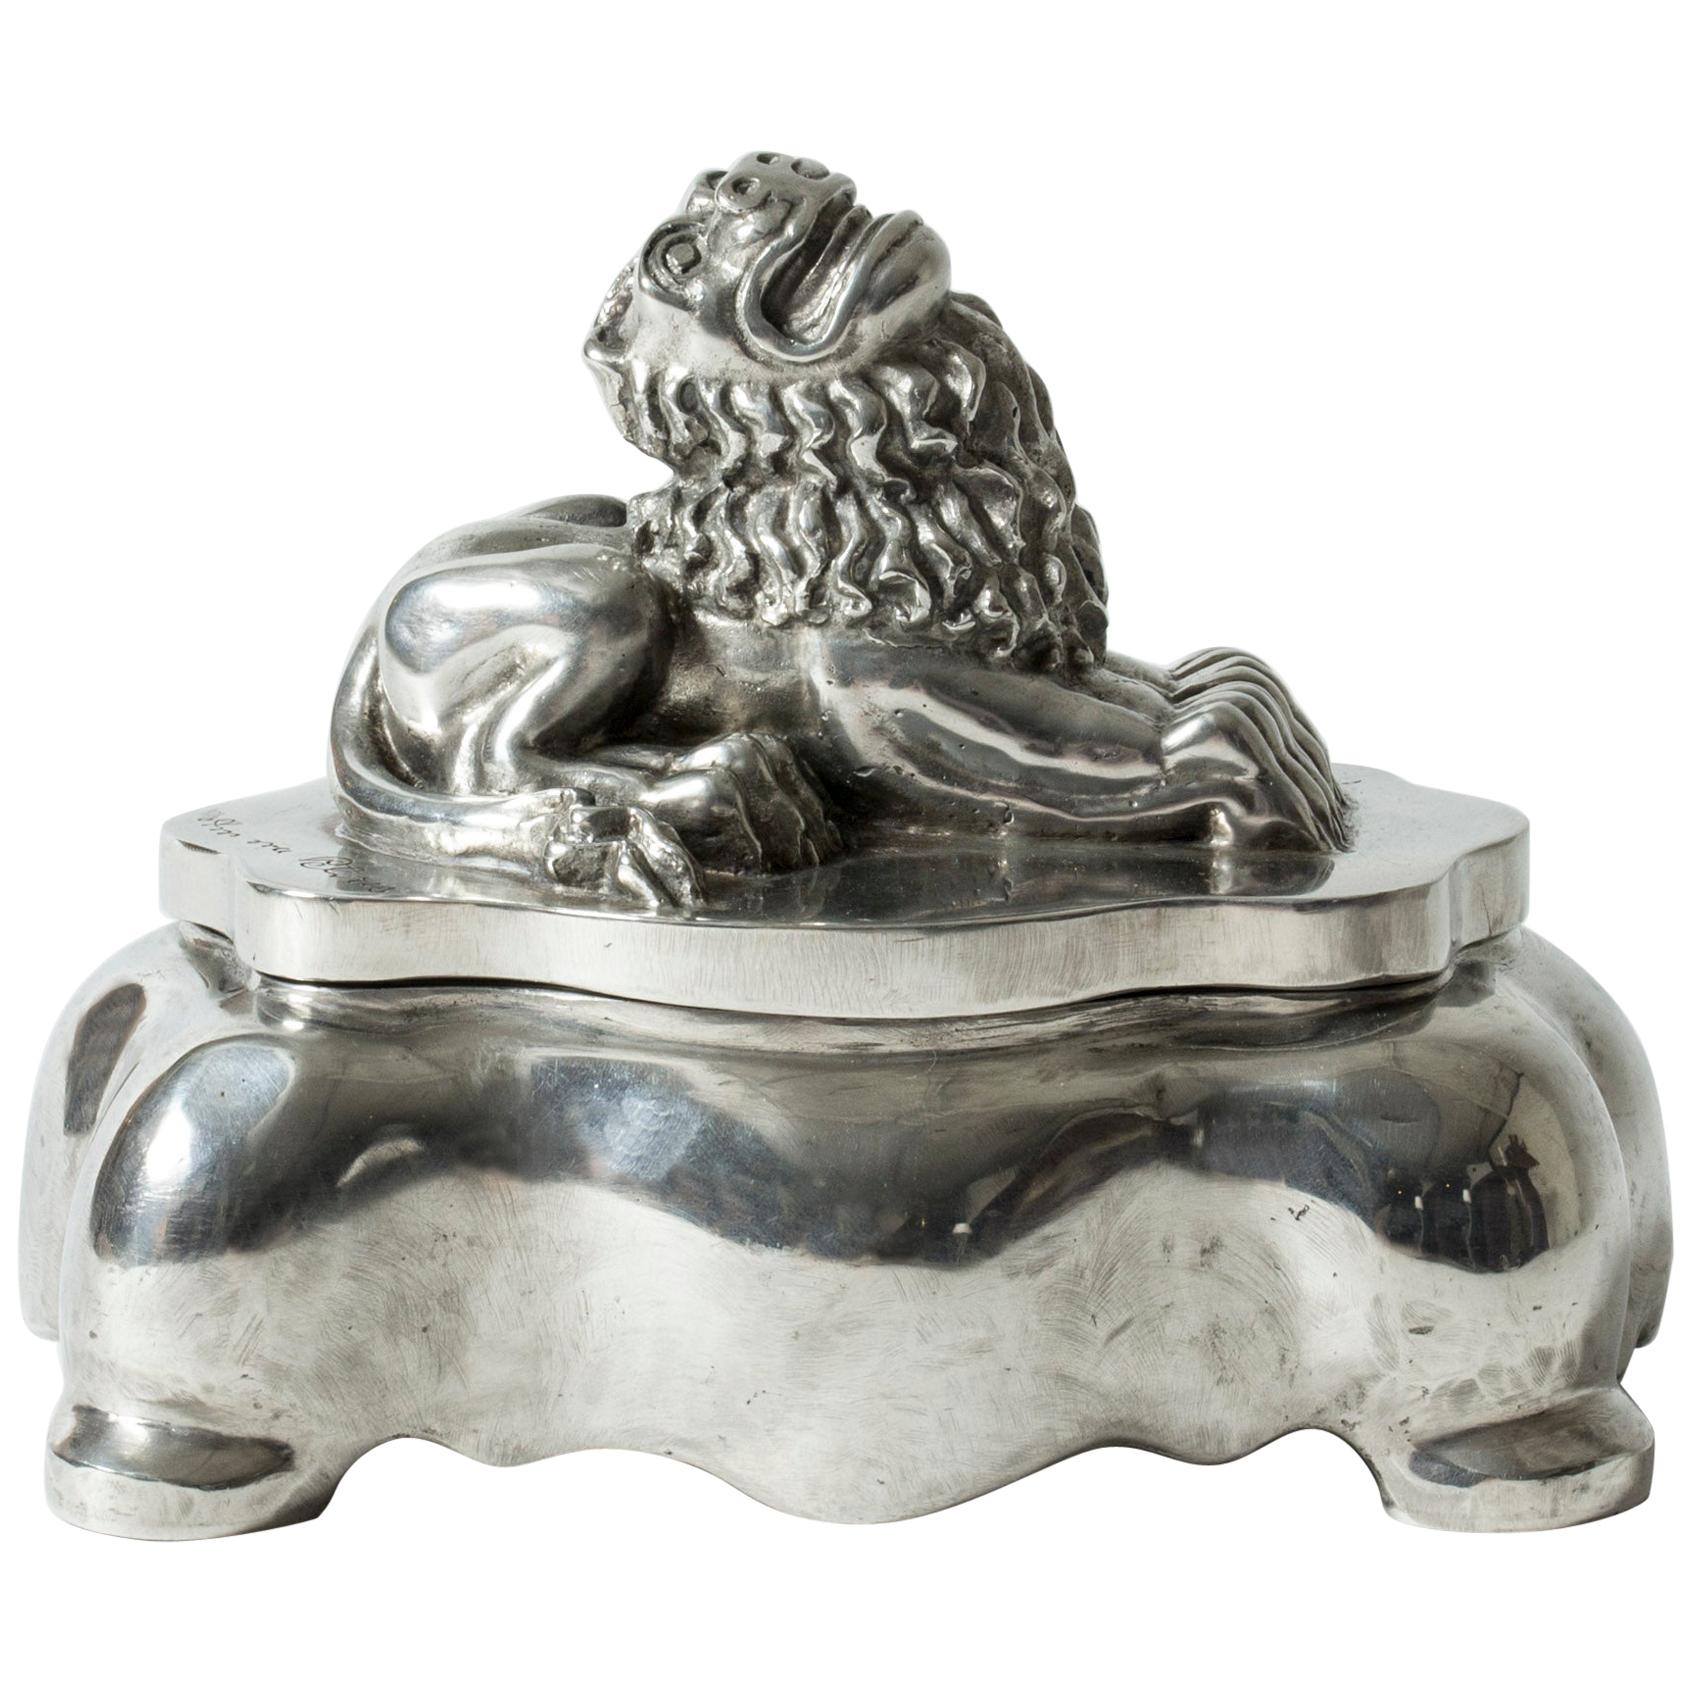 Sculptural Lion Pewter Inkwell Box by Anna Petrus for Herman Bergman, Sweden